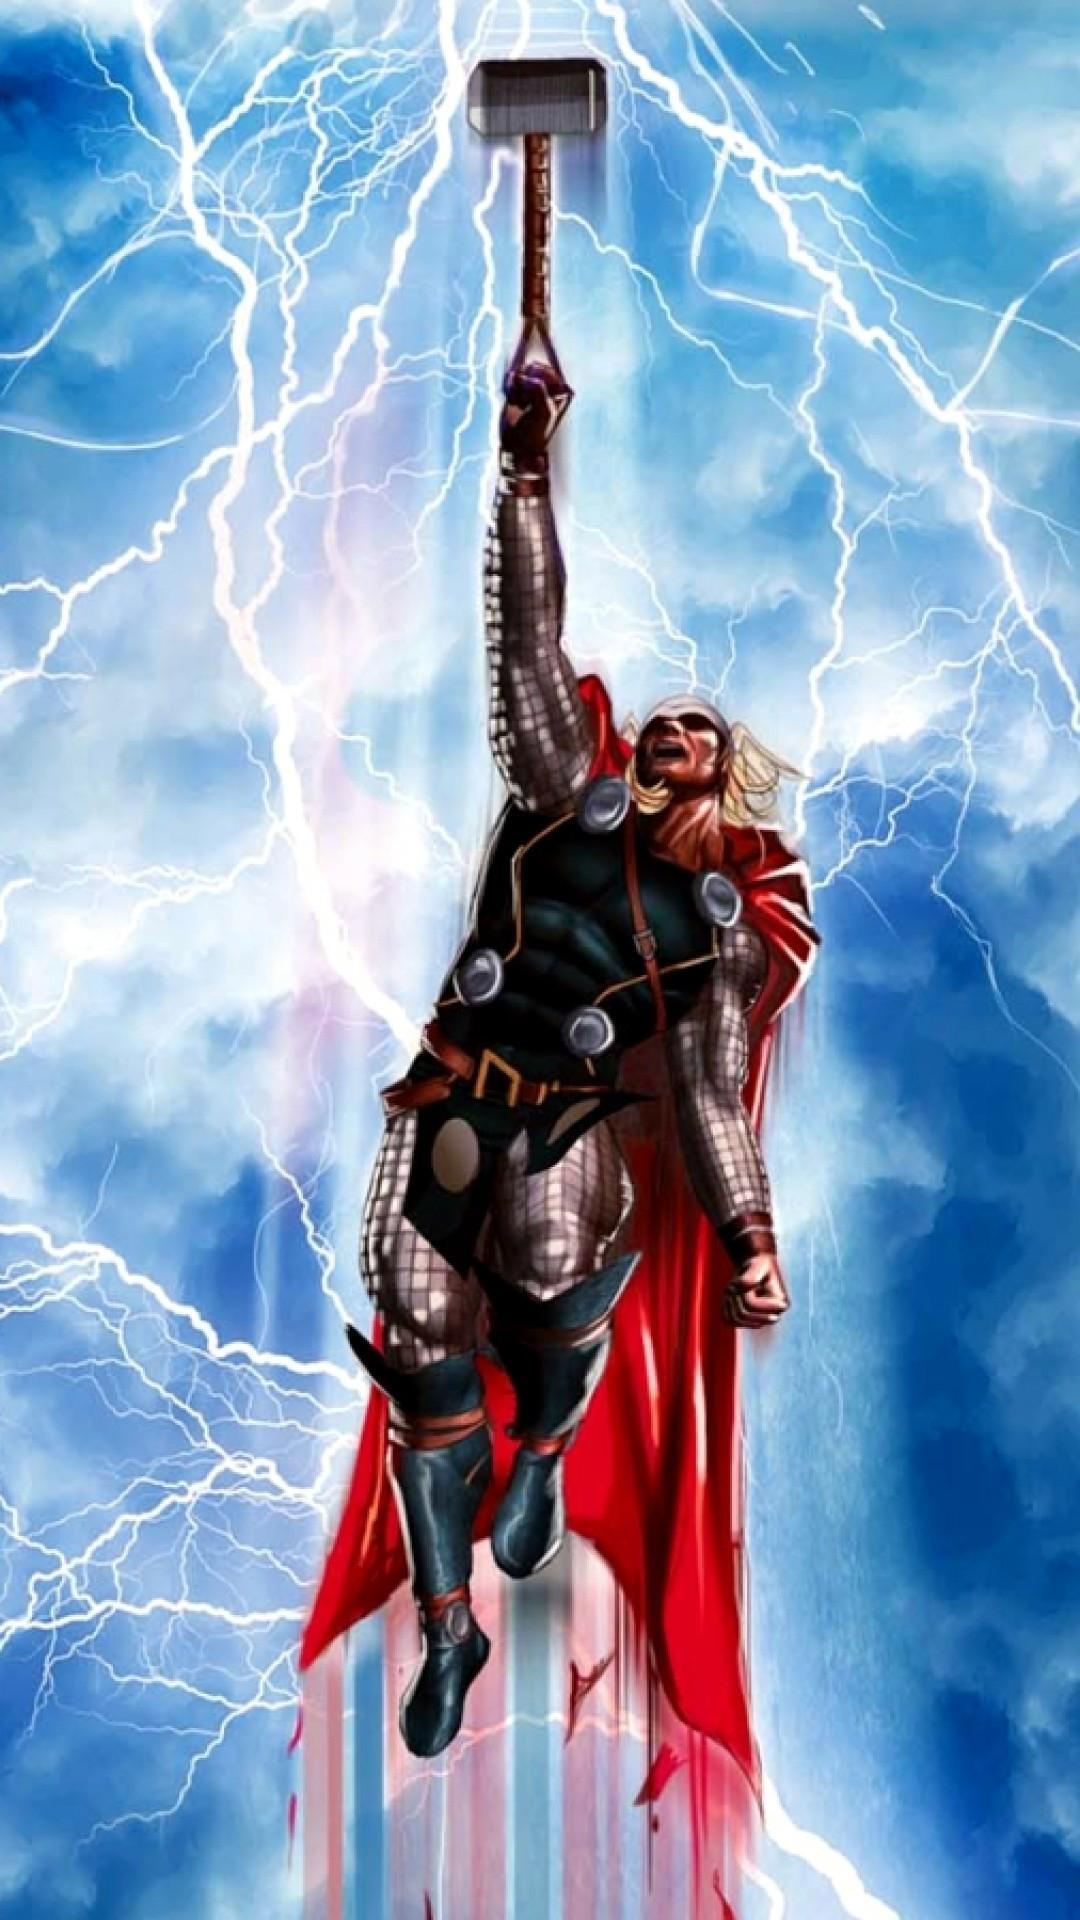 1080 x 1920 · jpeg - Thor iPhone HD Wallpapers - Wallpaper Cave